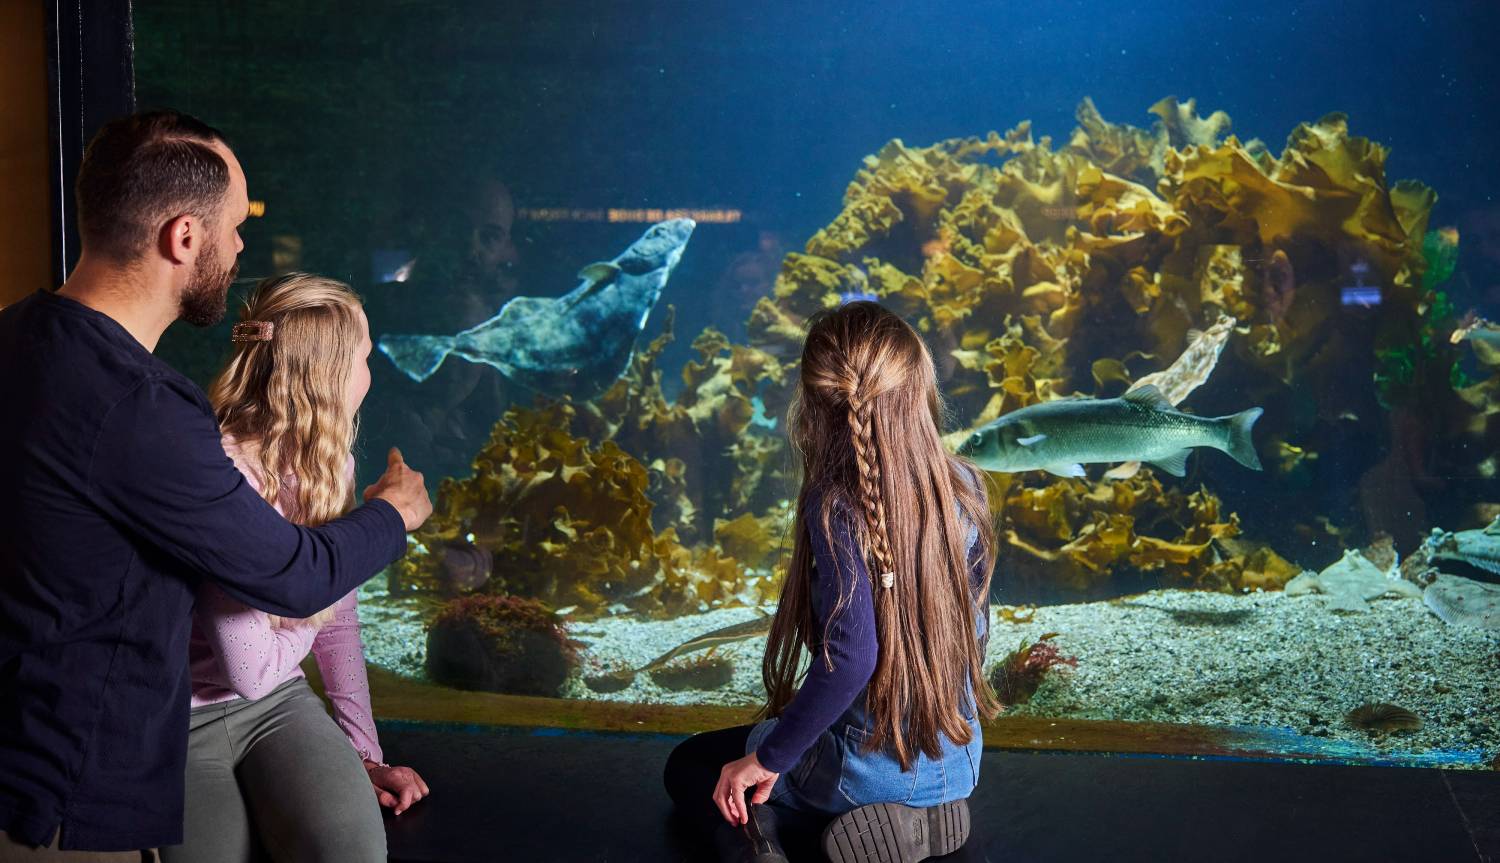 48 hours in Bergen and a visit to the Aquarium